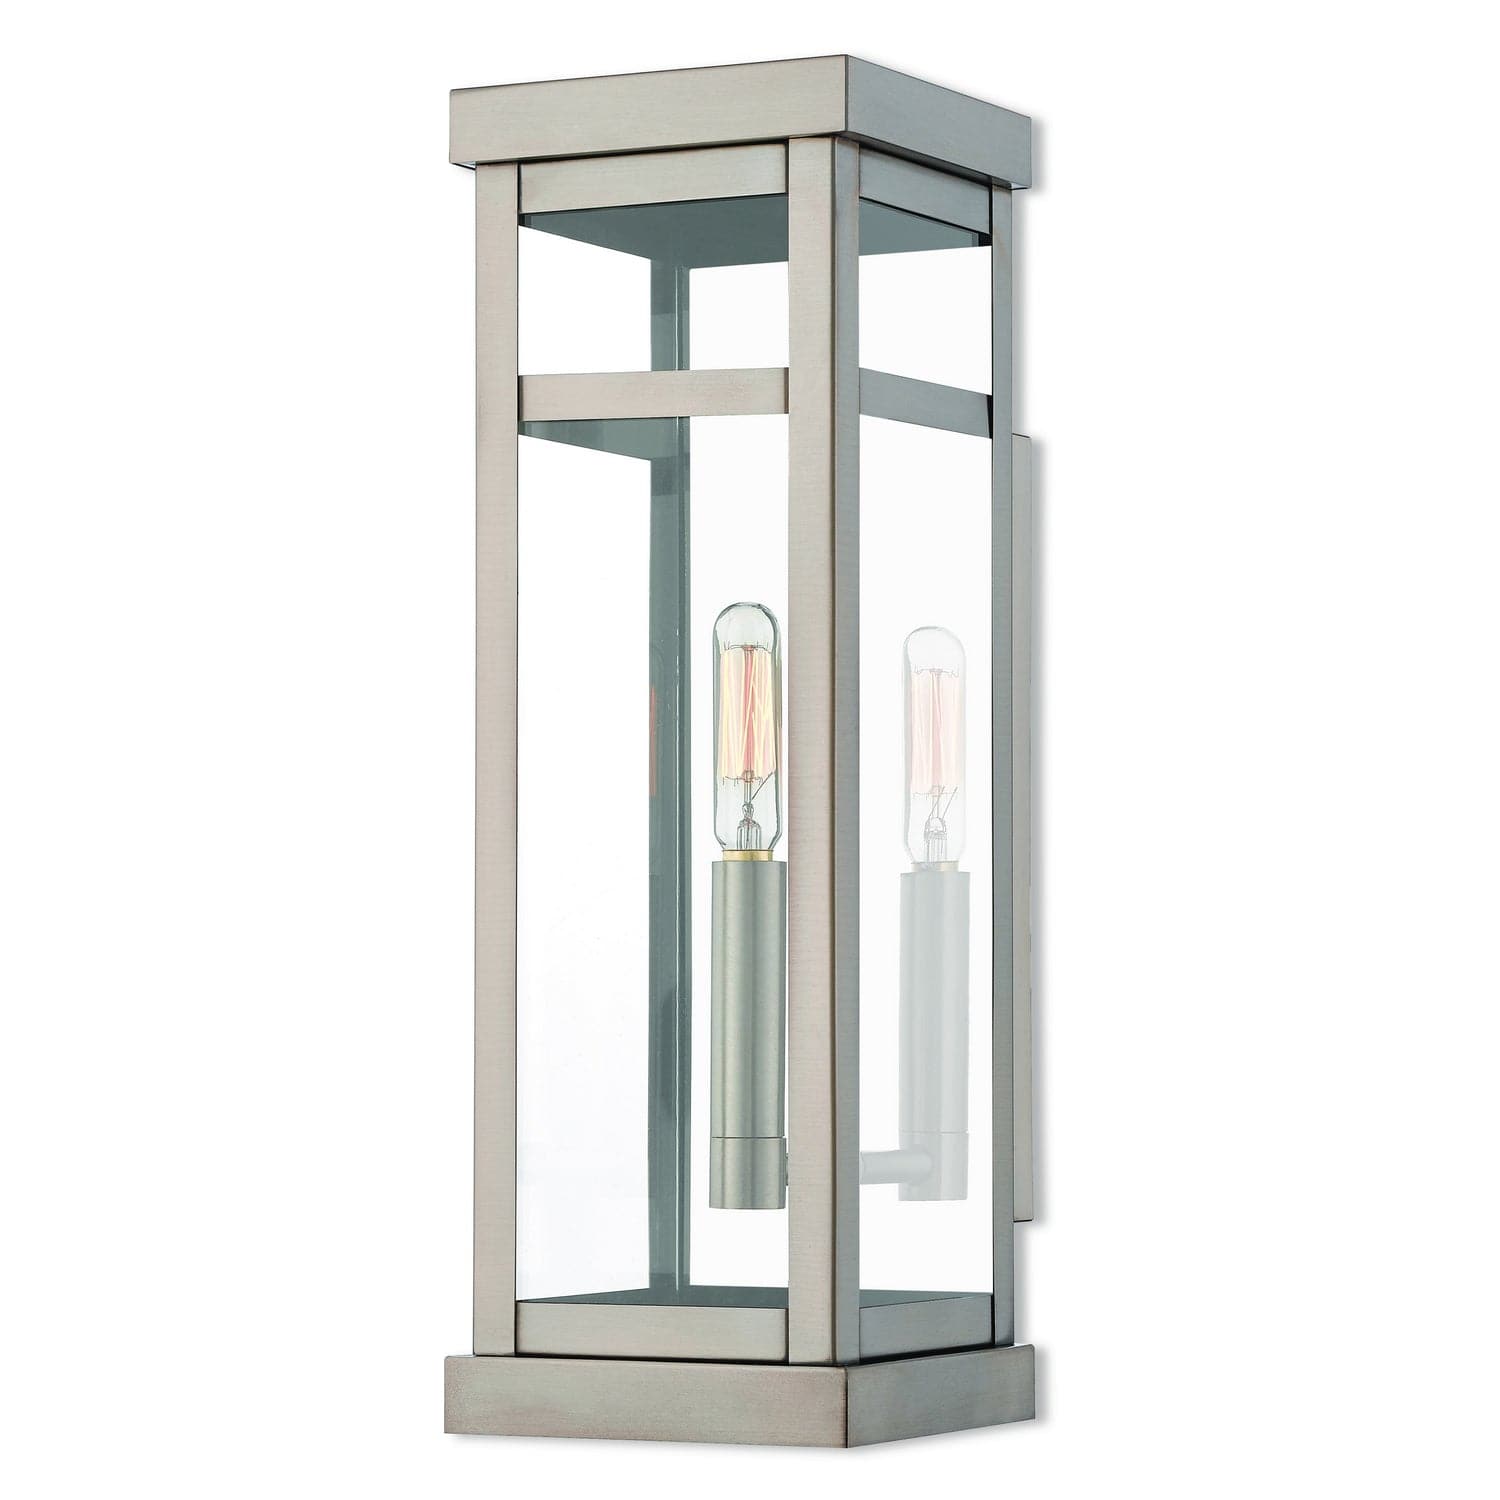 Livex Lighting - 20703-91 - One Light Outdoor Wall Lantern - Hopewell - Brushed Nickel w/ Polished Chrome Stainless Steel